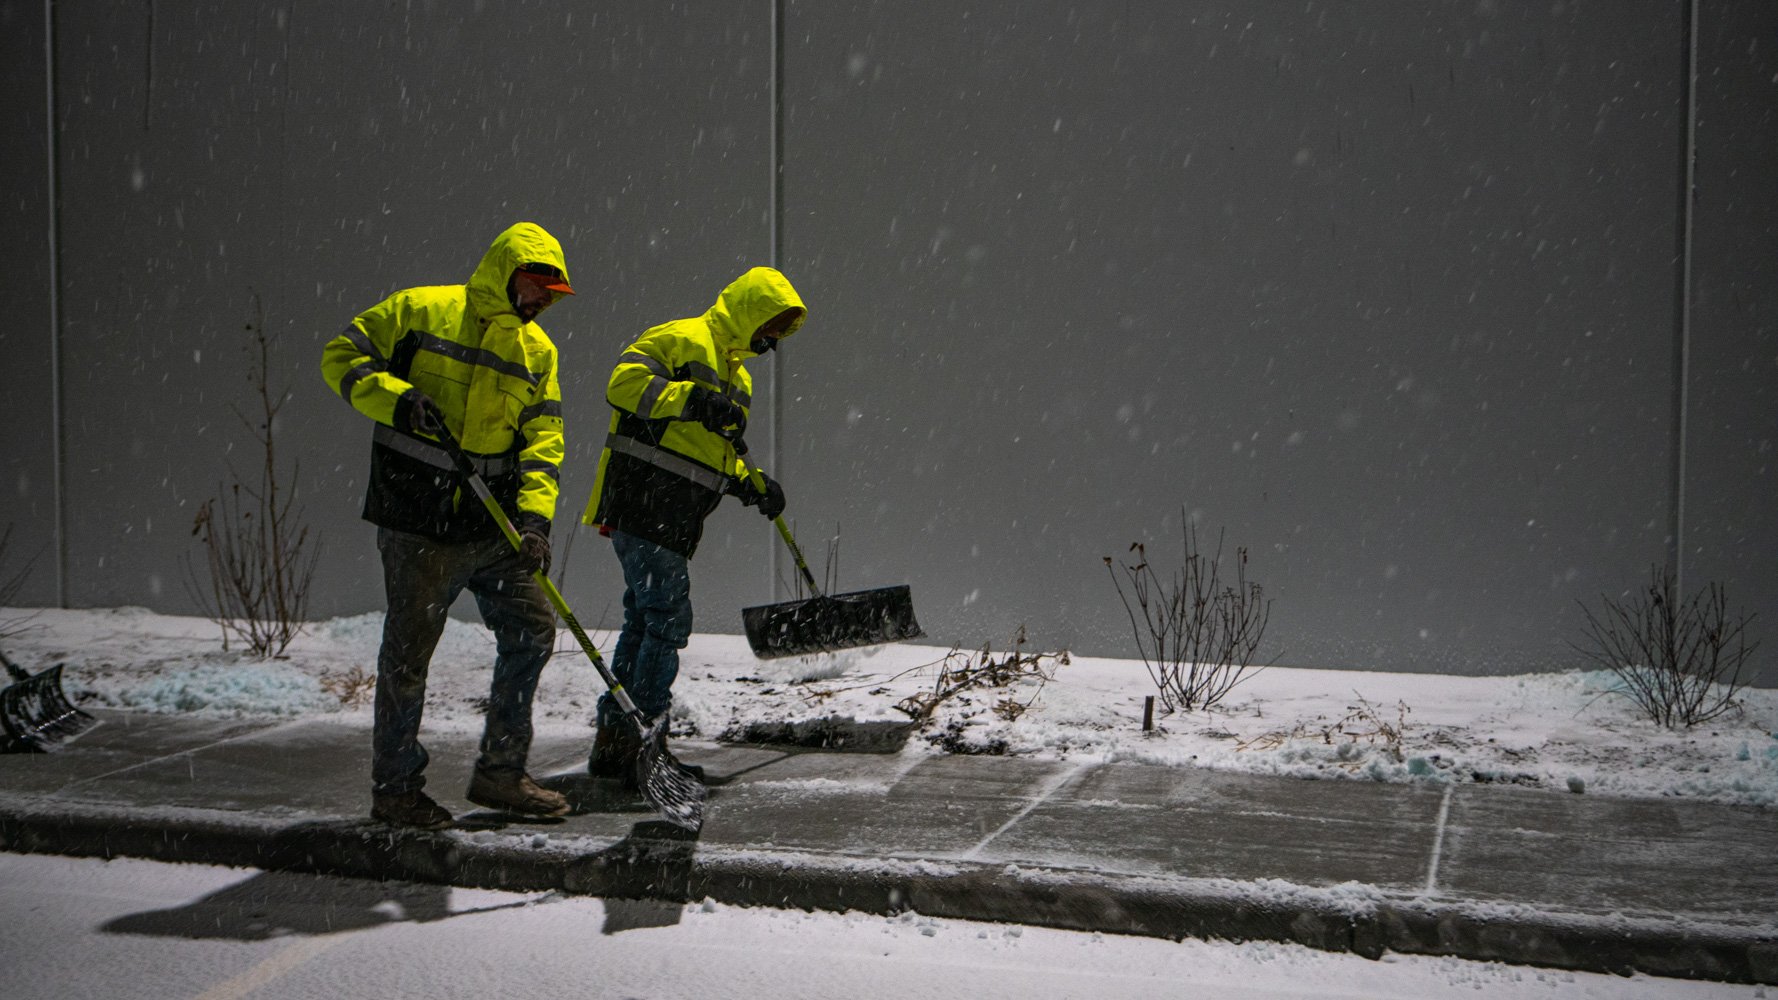 commercial snow removal team shoveling the sidewalk at an industrial facility at night